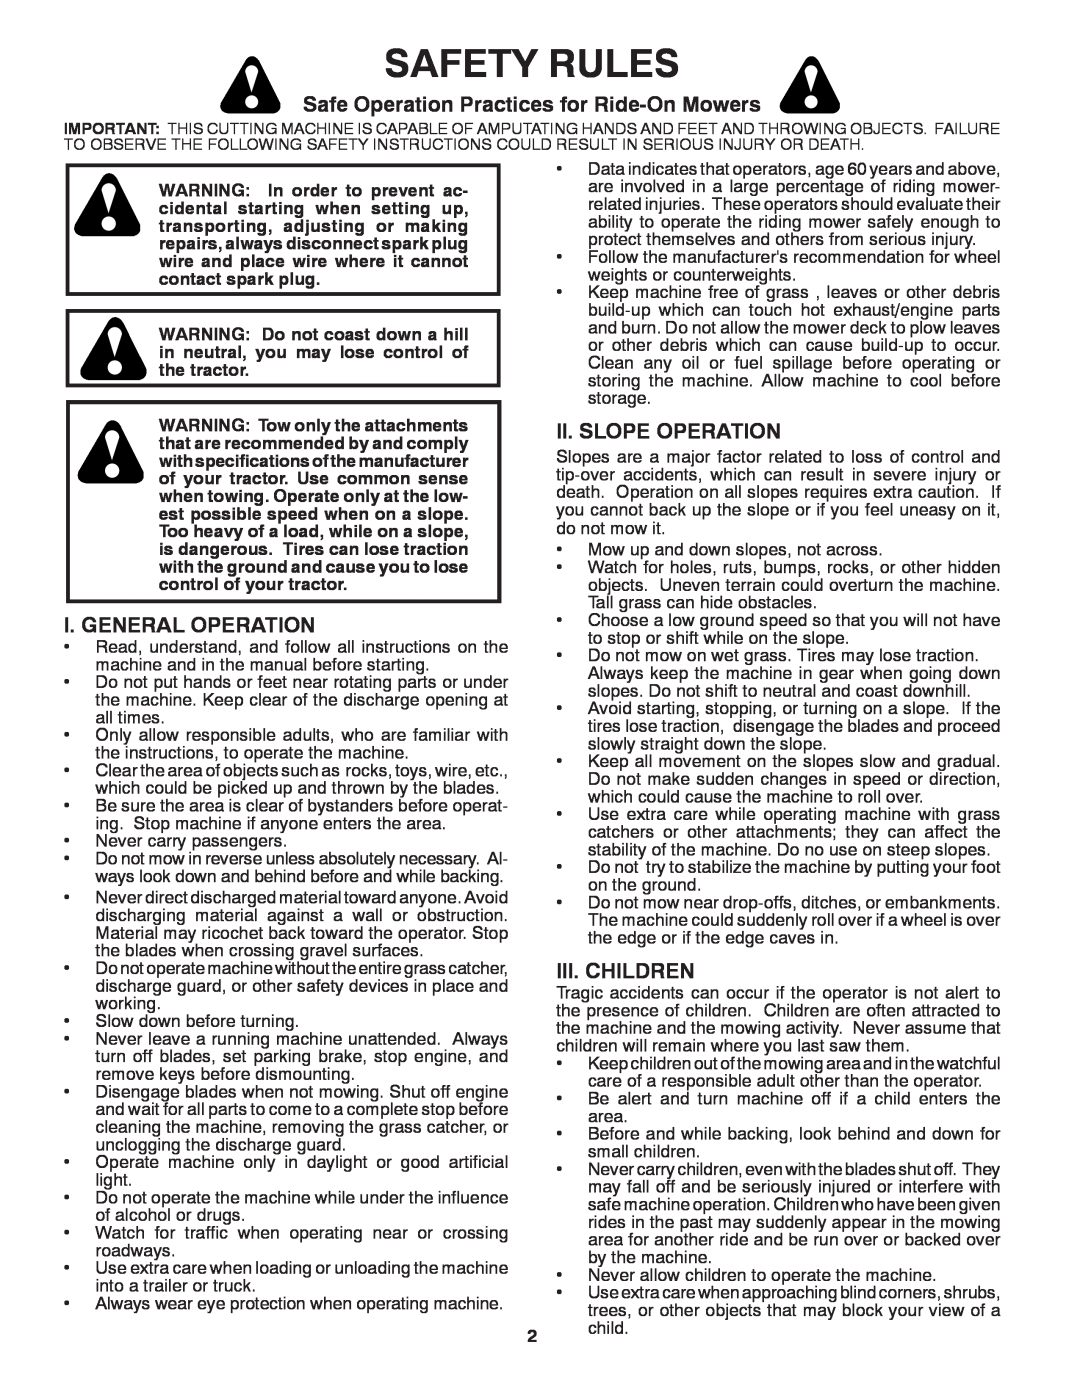 Craftsman 917.24991 Safety Rules, Safe Operation Practices for Ride-OnMowers, I. General Operation, Ii. Slope Operation 